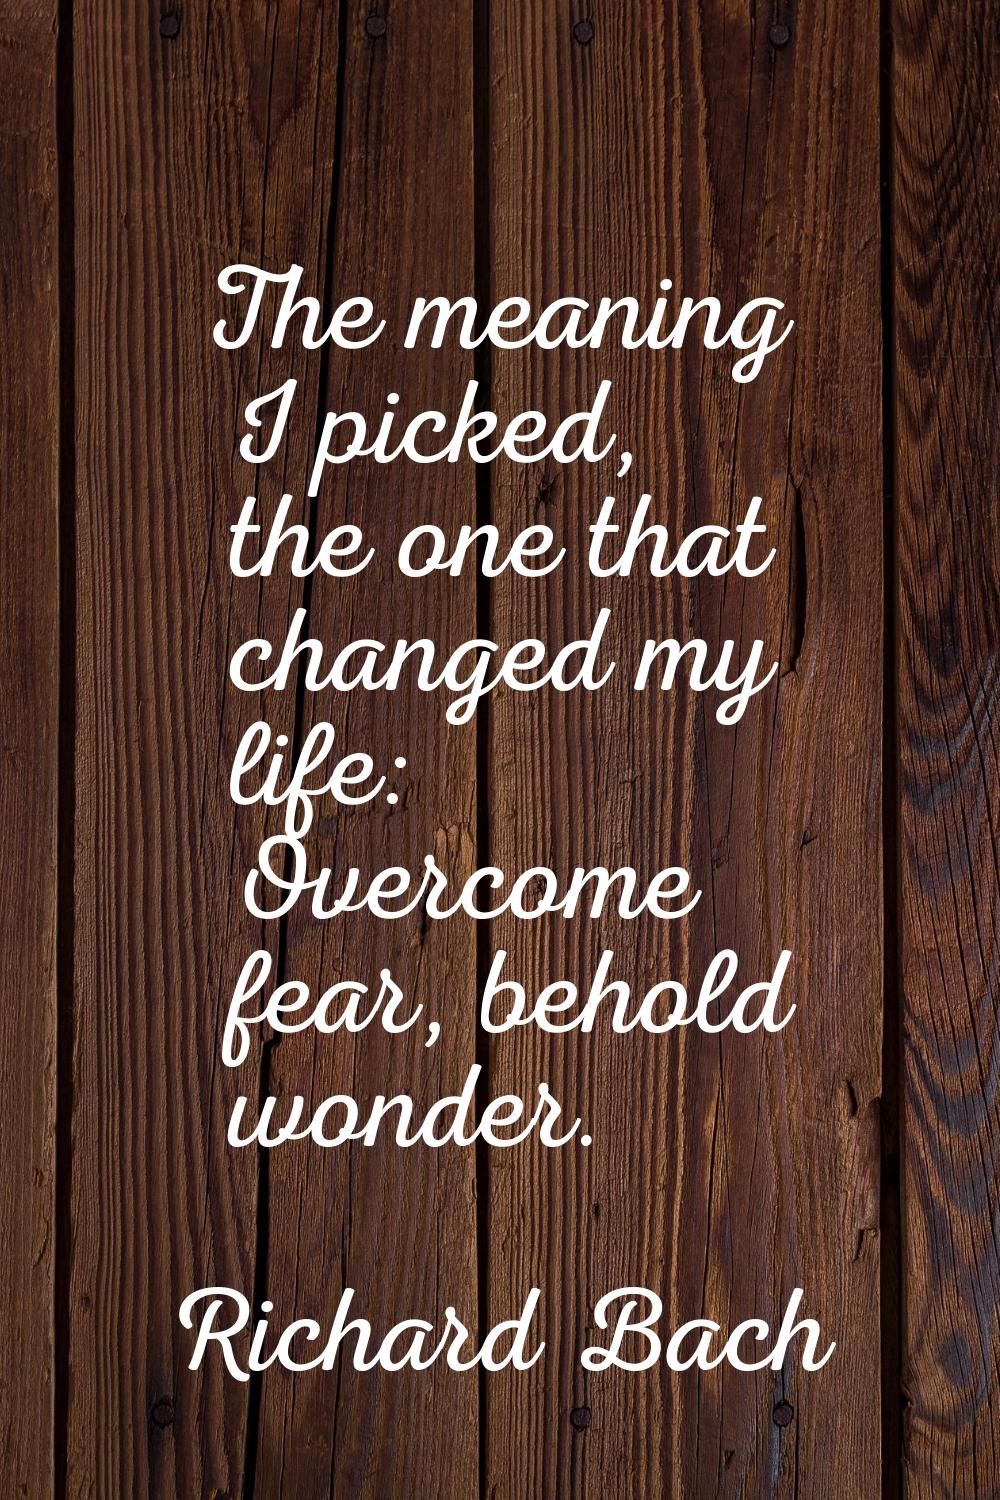 The meaning I picked, the one that changed my life: Overcome fear, behold wonder.